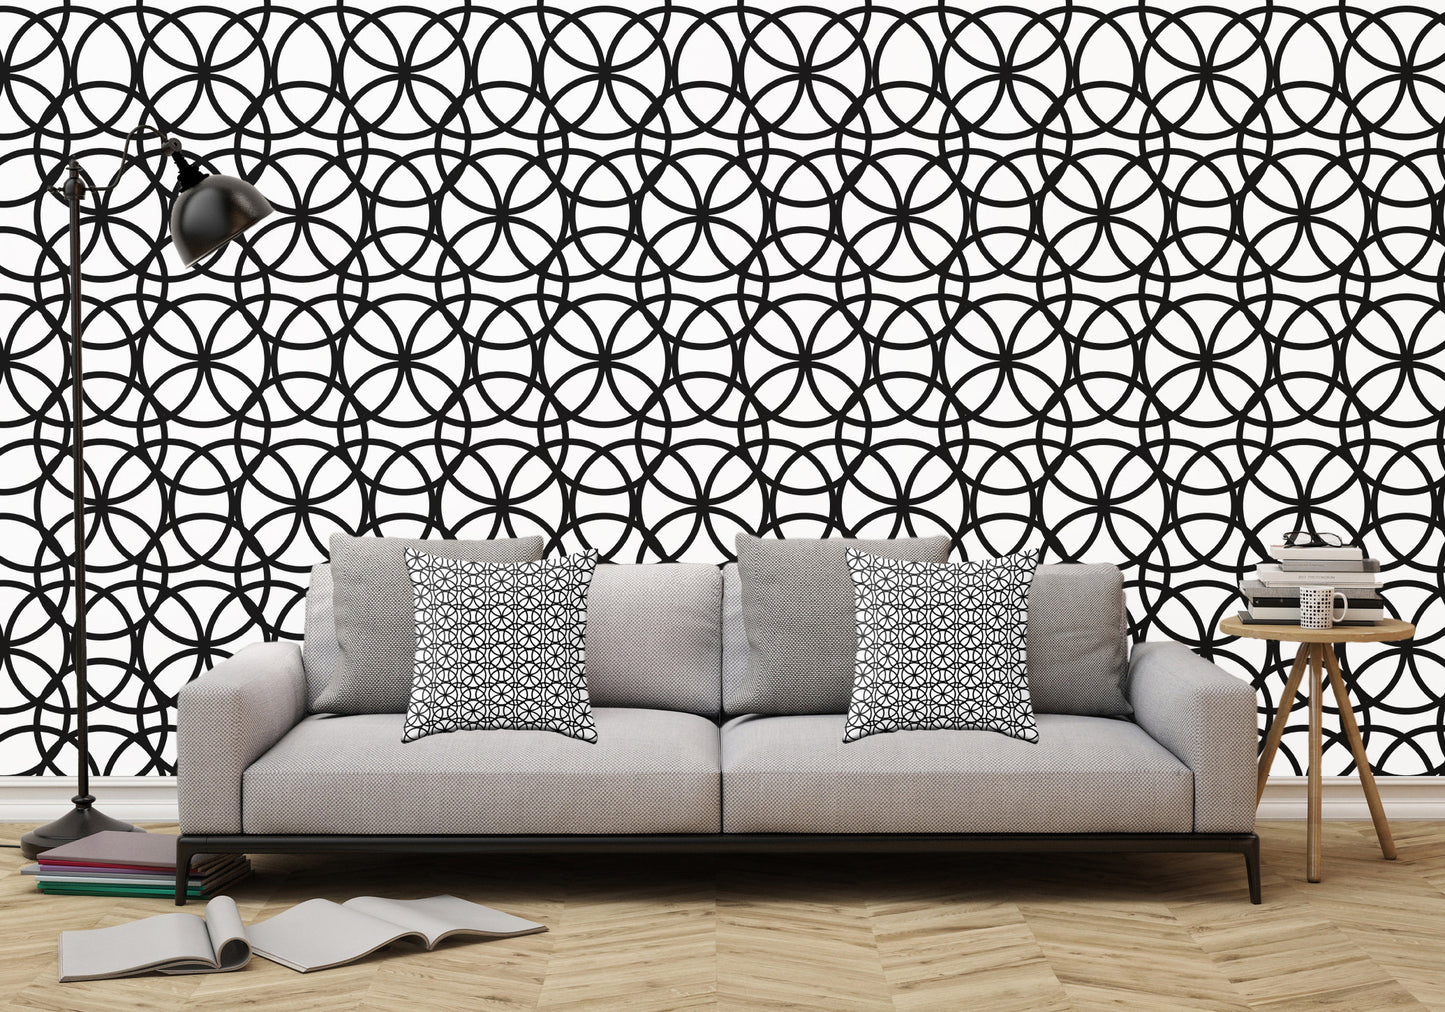 Circle Heaven Illustration - Adhesive Wallpaper - Removable Wallpaper - Wall Sticker - Full Size Wall Mural  - PIPAFINEART